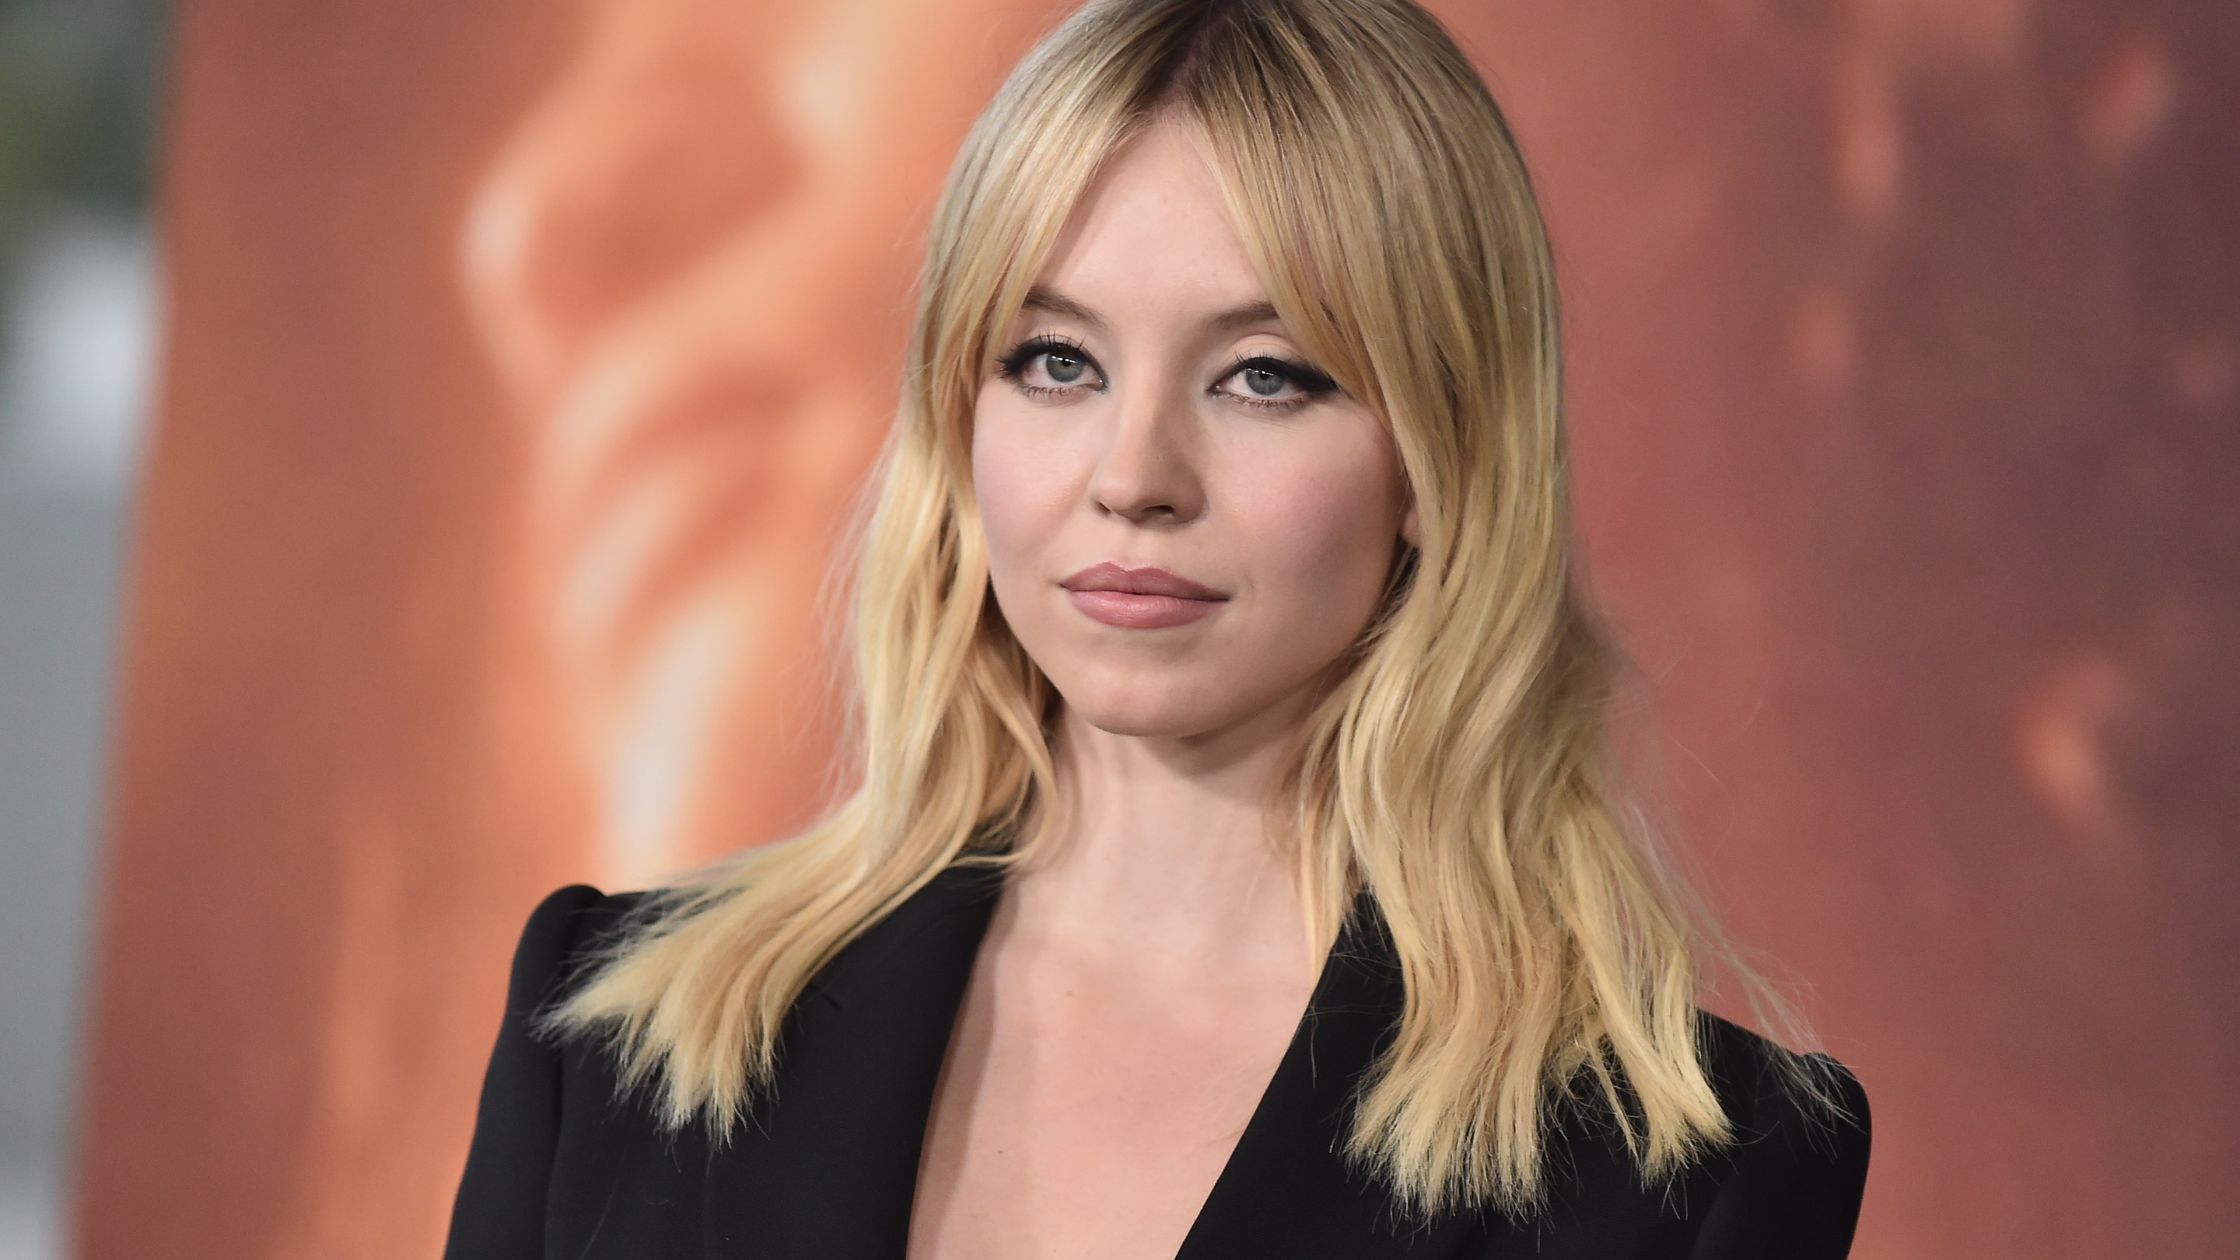 LOS ANGELES - APR 20: Sydney Sweeney arrives for the ‘Euphoria’ FYC Party on April 20, 2022 in Los Angeles, CA (DFree/Shutterstock.com)